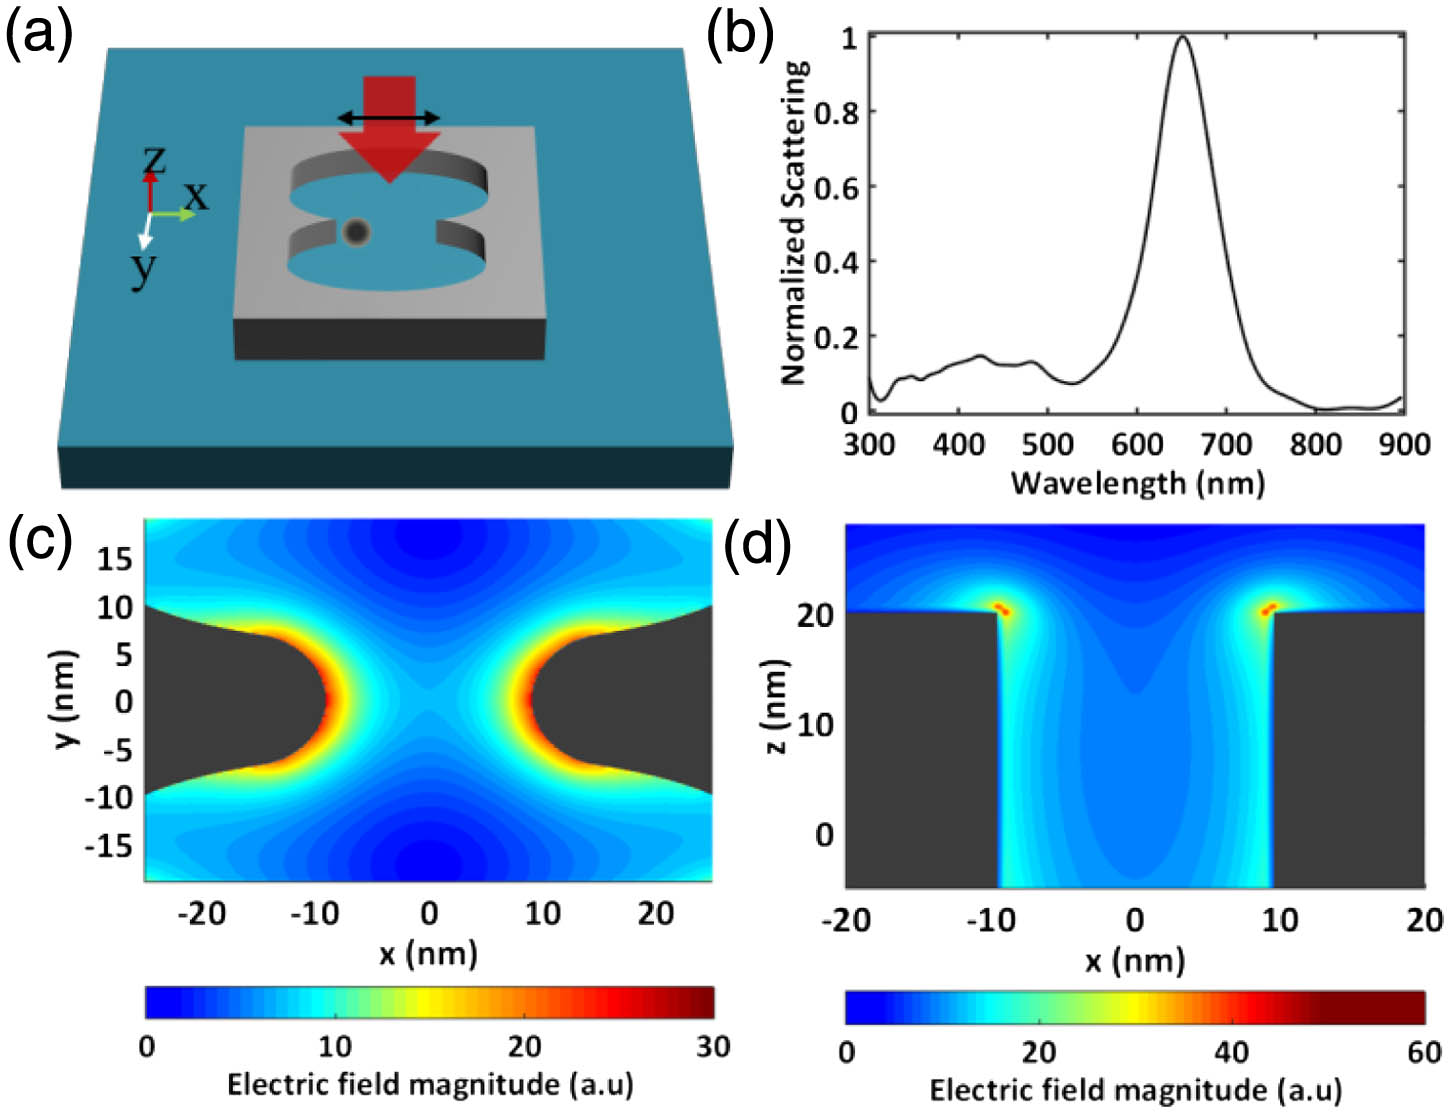 Optical trapping of quantum dots for the study of the strong light–matter interaction. (a) Nanotweezers with double holes in a silver patch. (b) Scattering spectrum of the nano-structure without quantum dots. The spectrum is normalized to its maximum. (c) Electric field distribution in the x–y plane located at the top surface of the silver patch. (d) Electric field distribution in the x–z plane bisecting the nanostructure. Gray areas indicate the structures.